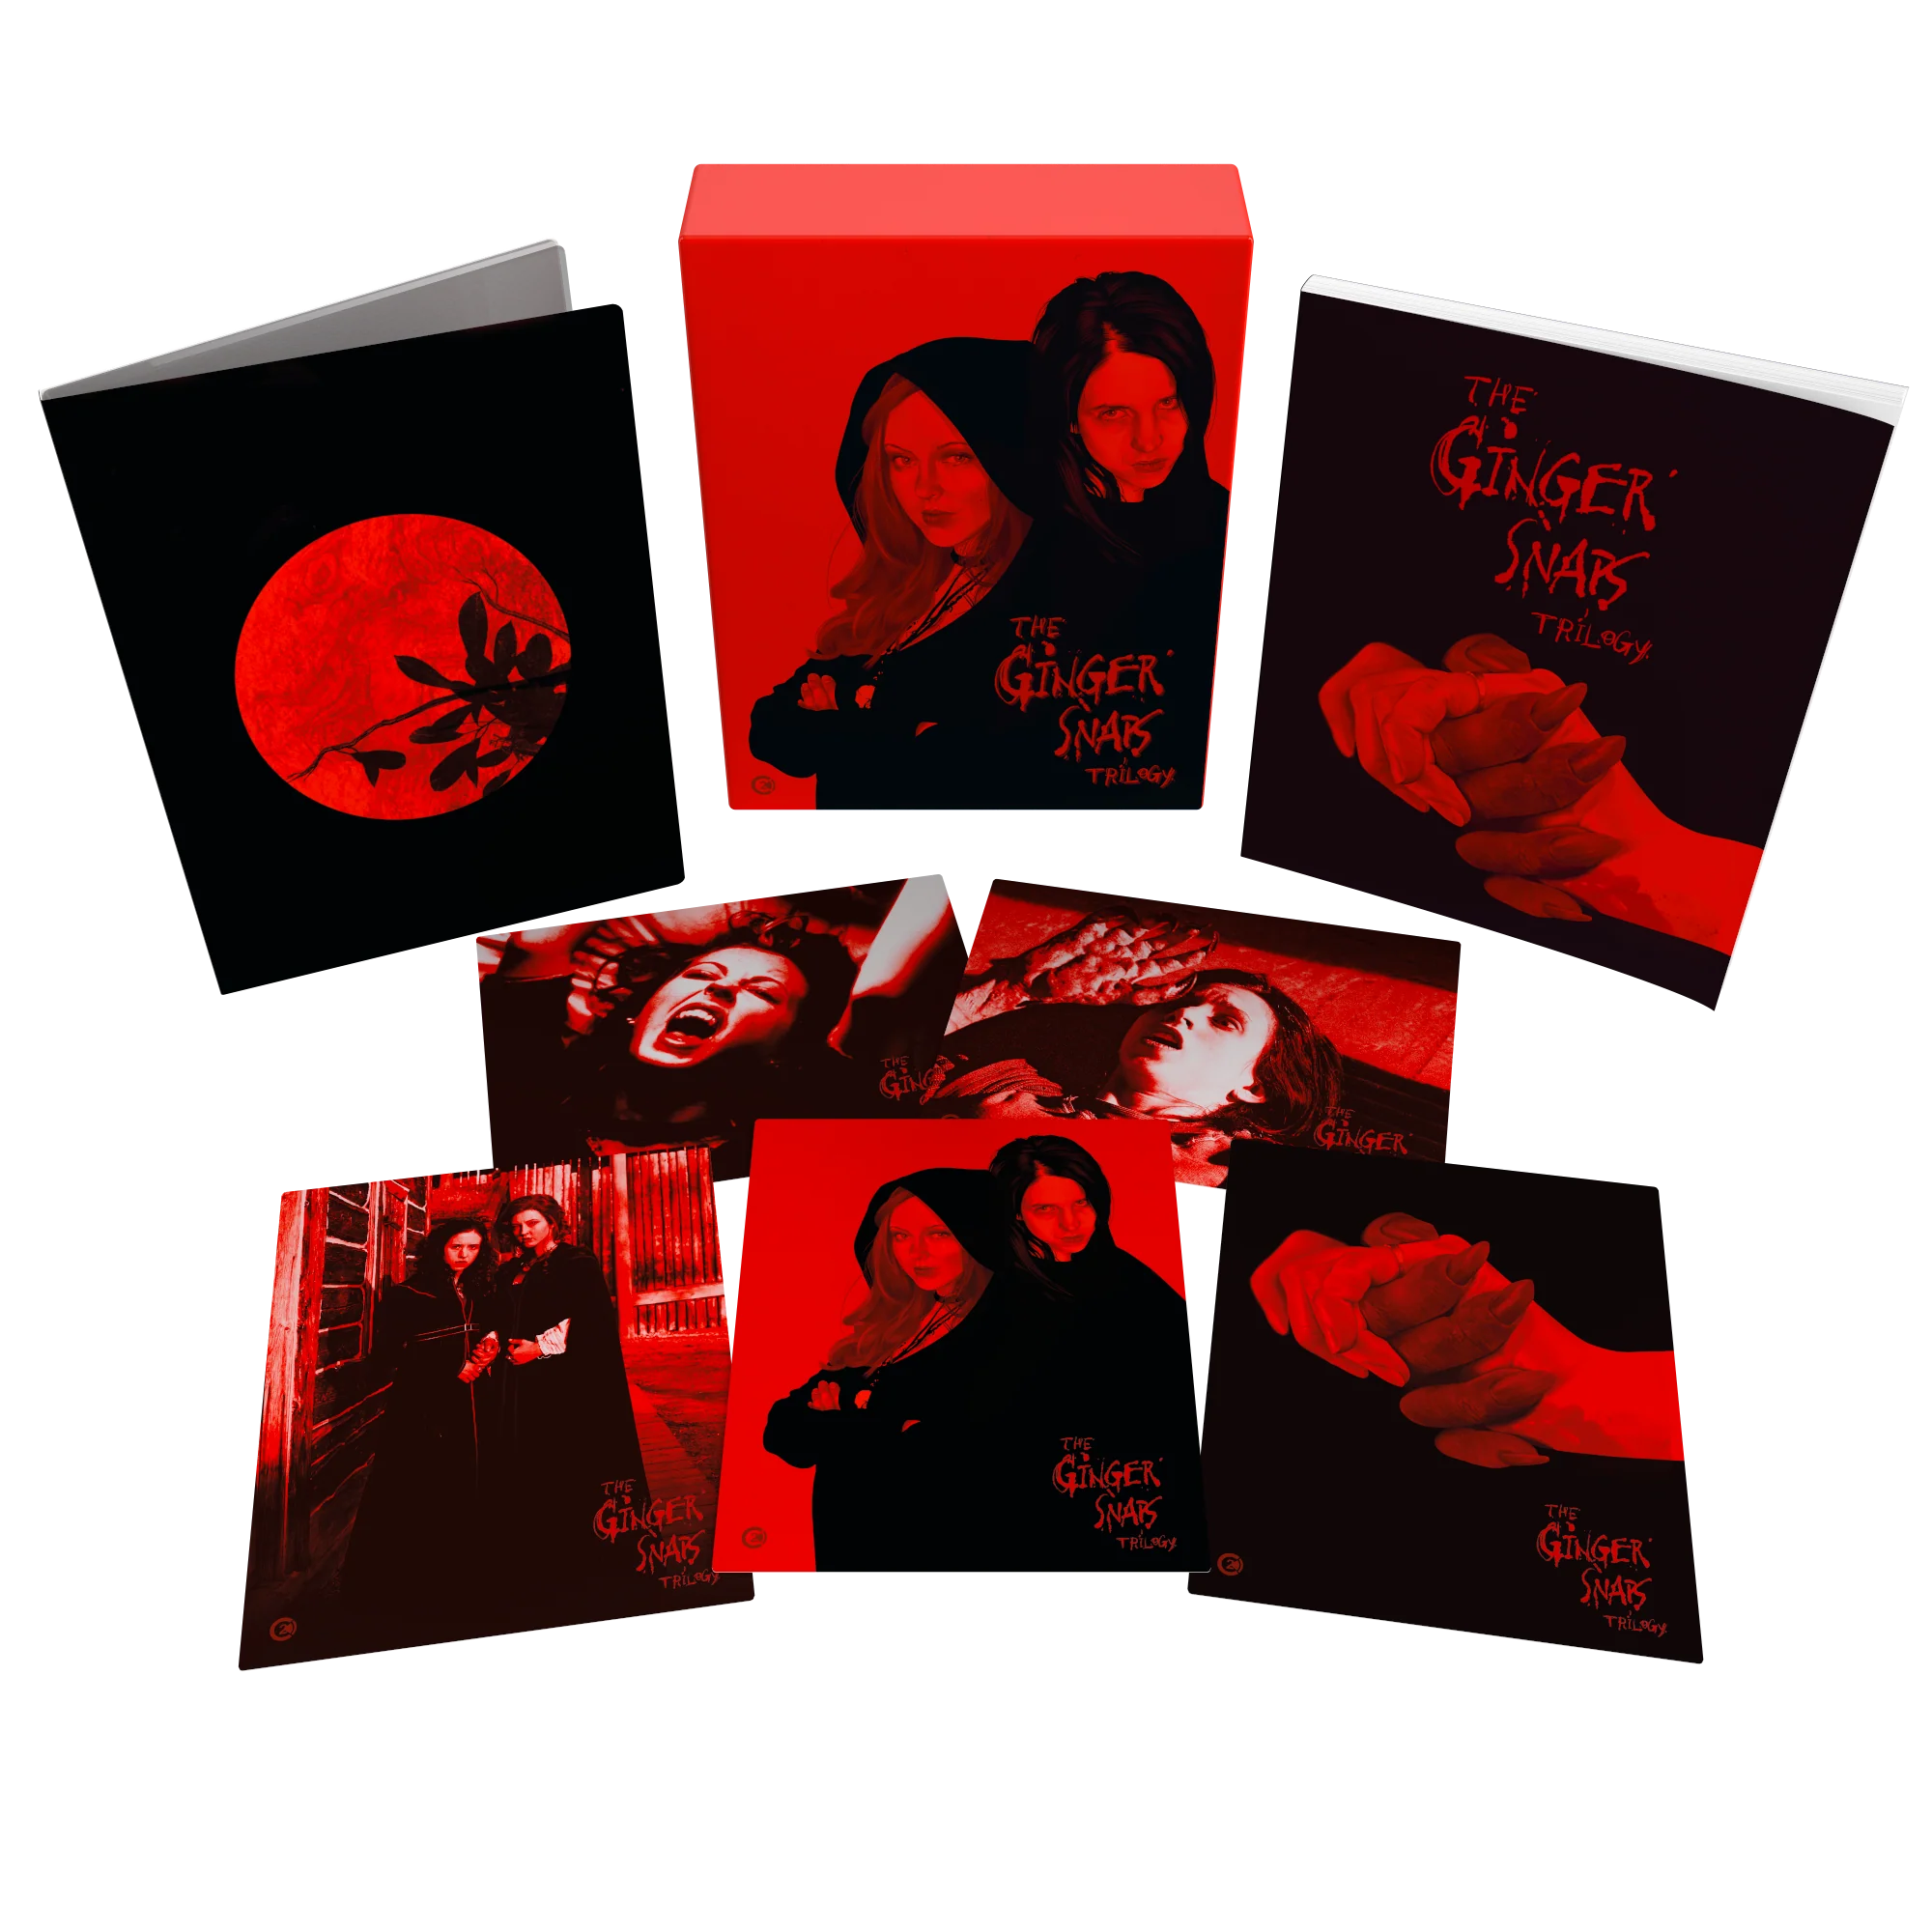 THE GINGER SNAPS TRILOGY (REGION B IMPORT - LIMITED EDITION) BLU-RAY